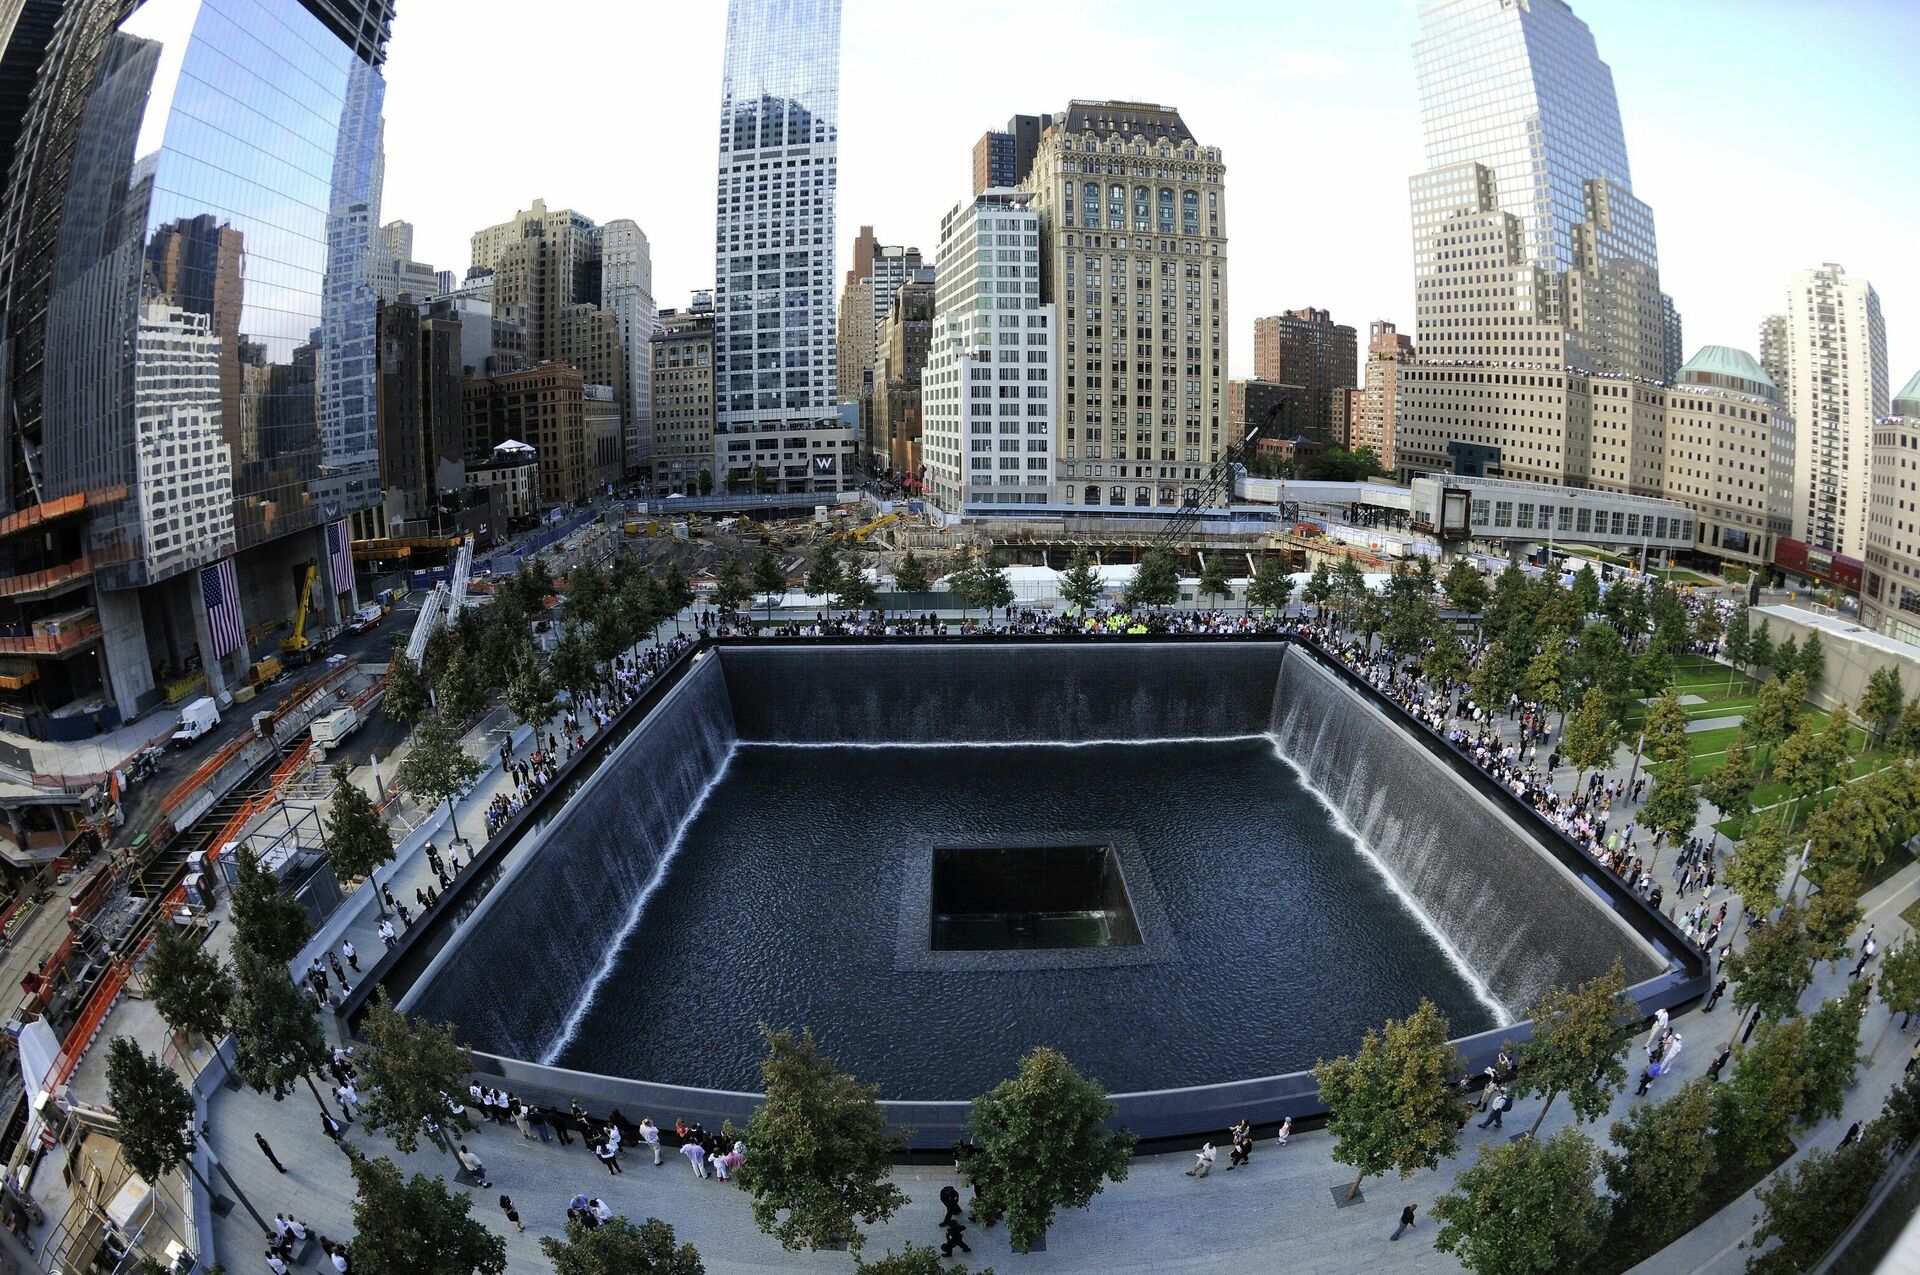 Families visit the South Memorial Pool during tenth anniversary ceremonies at the World Trade Center site in New York, U.S., September 11, 2011 - Sputnik International, 1920, 11.09.2021